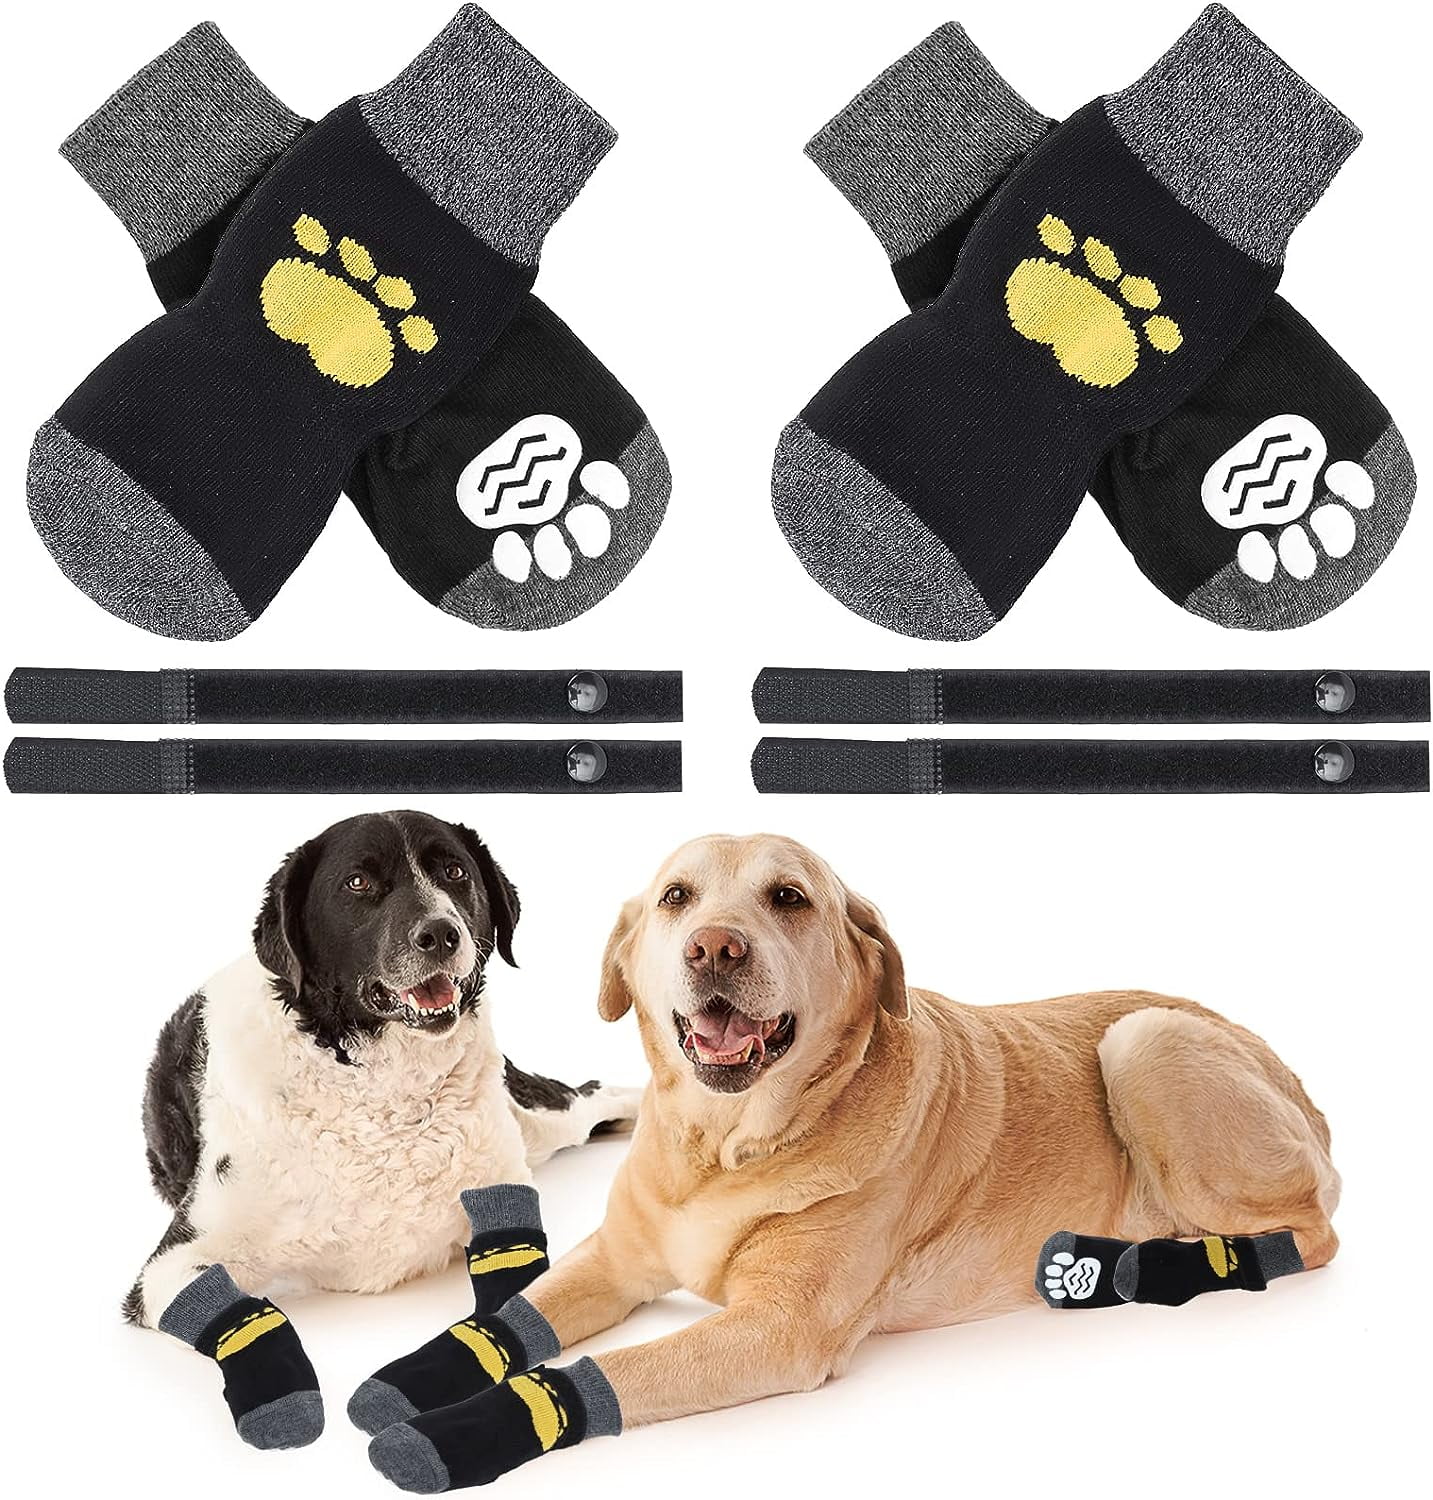 Dog Socks for Hardwood Floors to Prevent Licking,Dog Boots Paw Protector  with Non Anti Slip, Dog Grips for Large Senior Dogs,Pack of 4